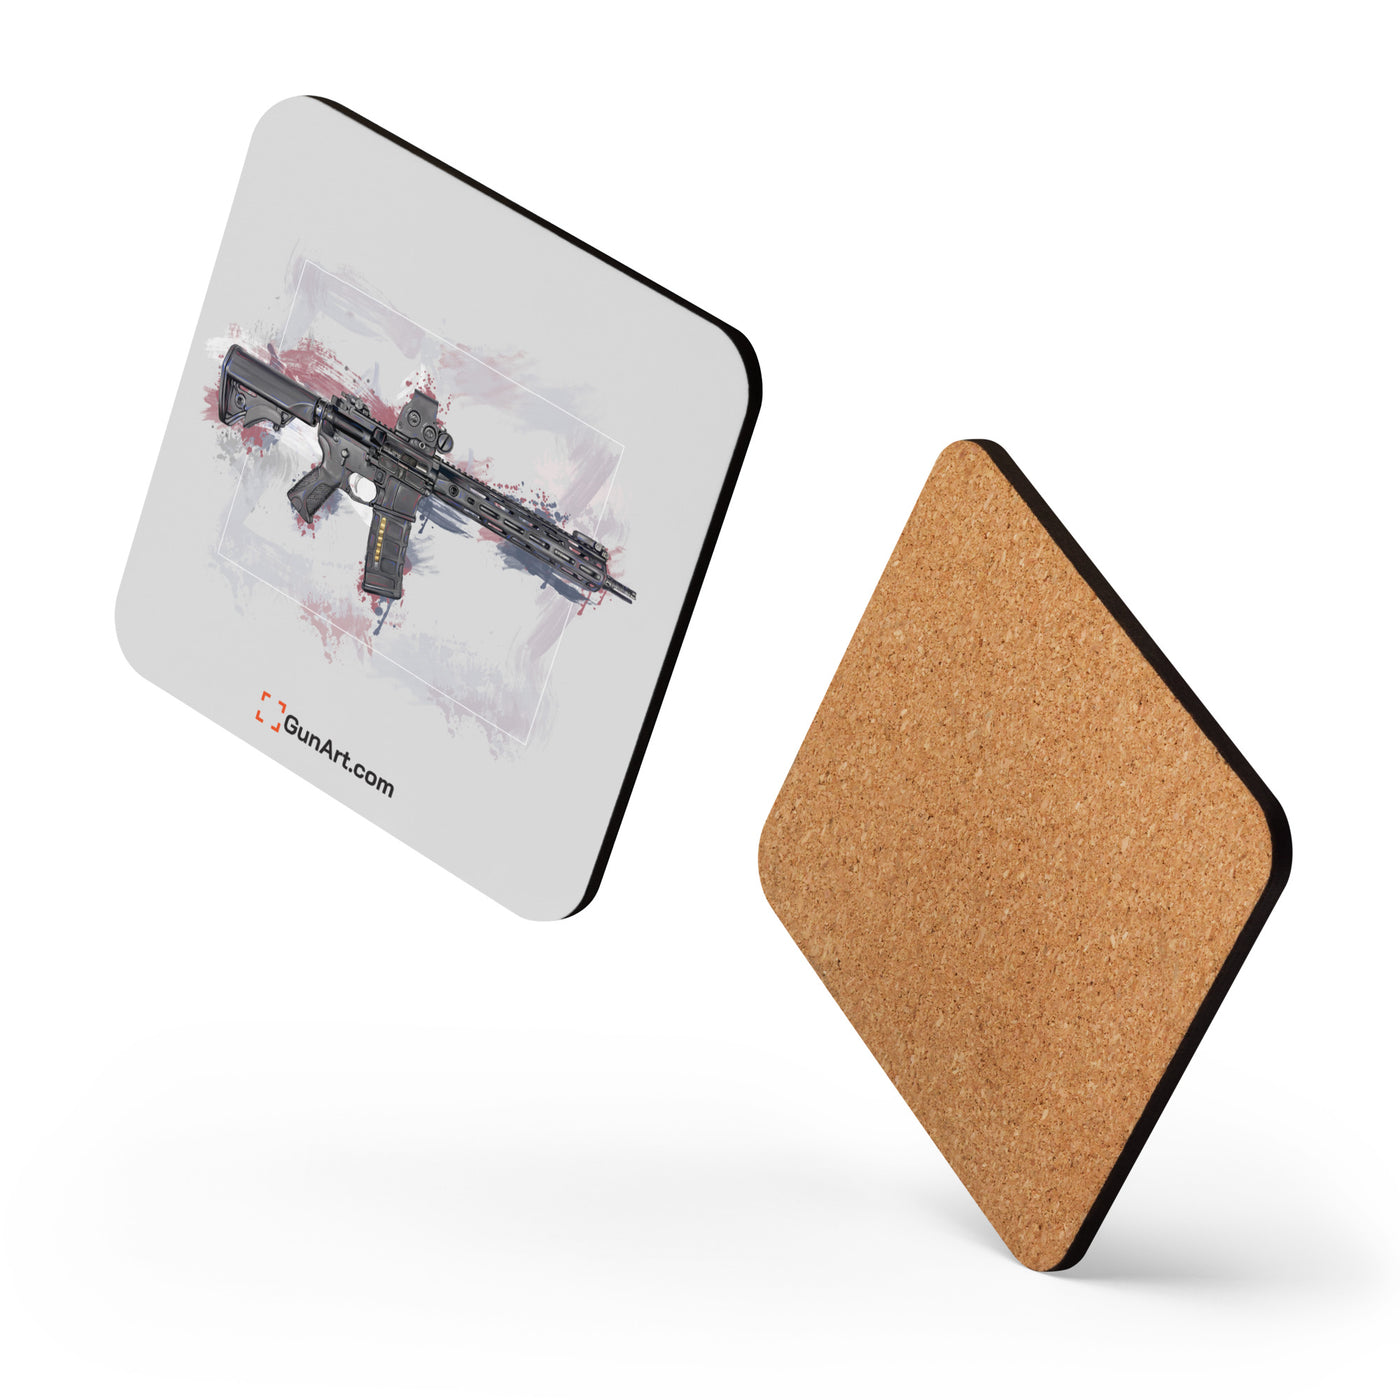 Defending Freedom - Wyoming - AR-15 State Cork-back Coaster - White State